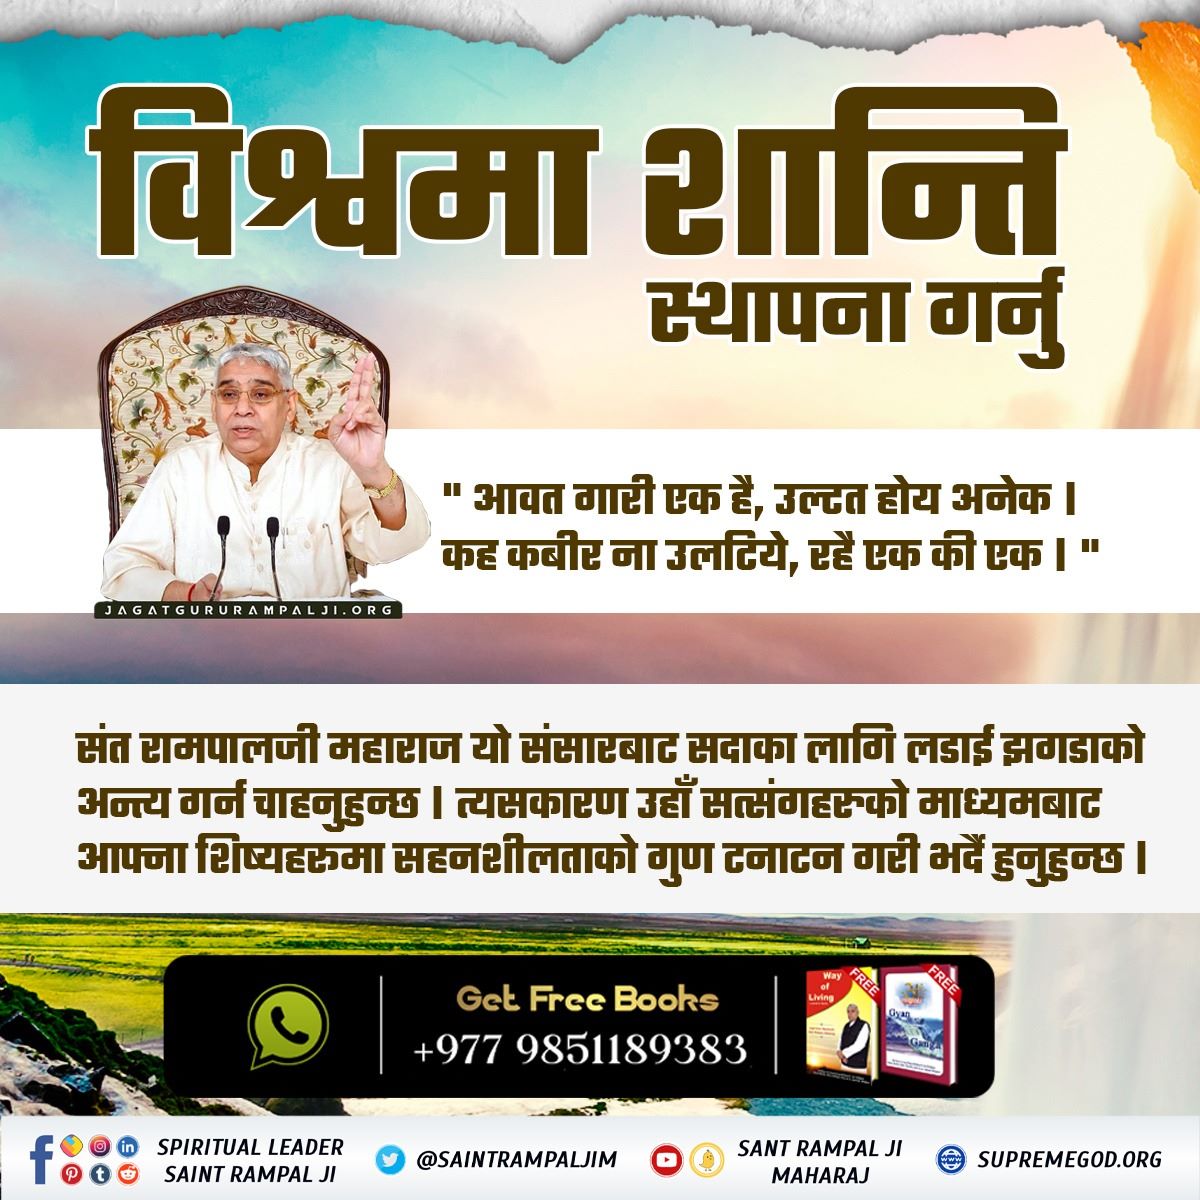 #AimOfSantRampalJi is to reawake humanity in people which is now slow declining due to materialism and shallow education....